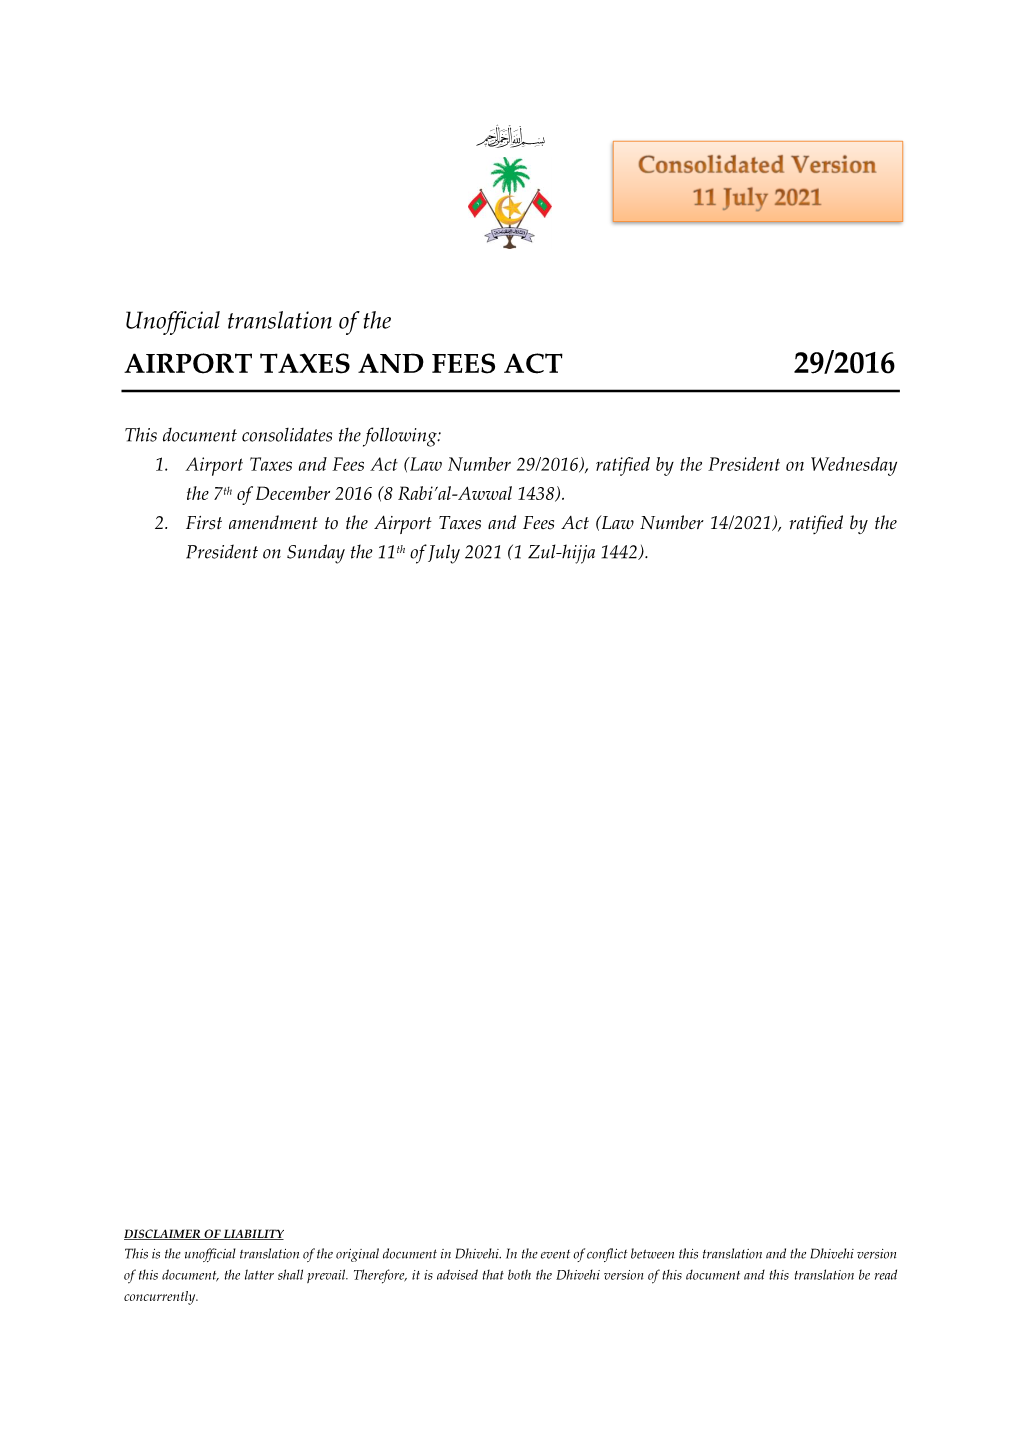 Airport Taxes and Fees Act (Consolidated)